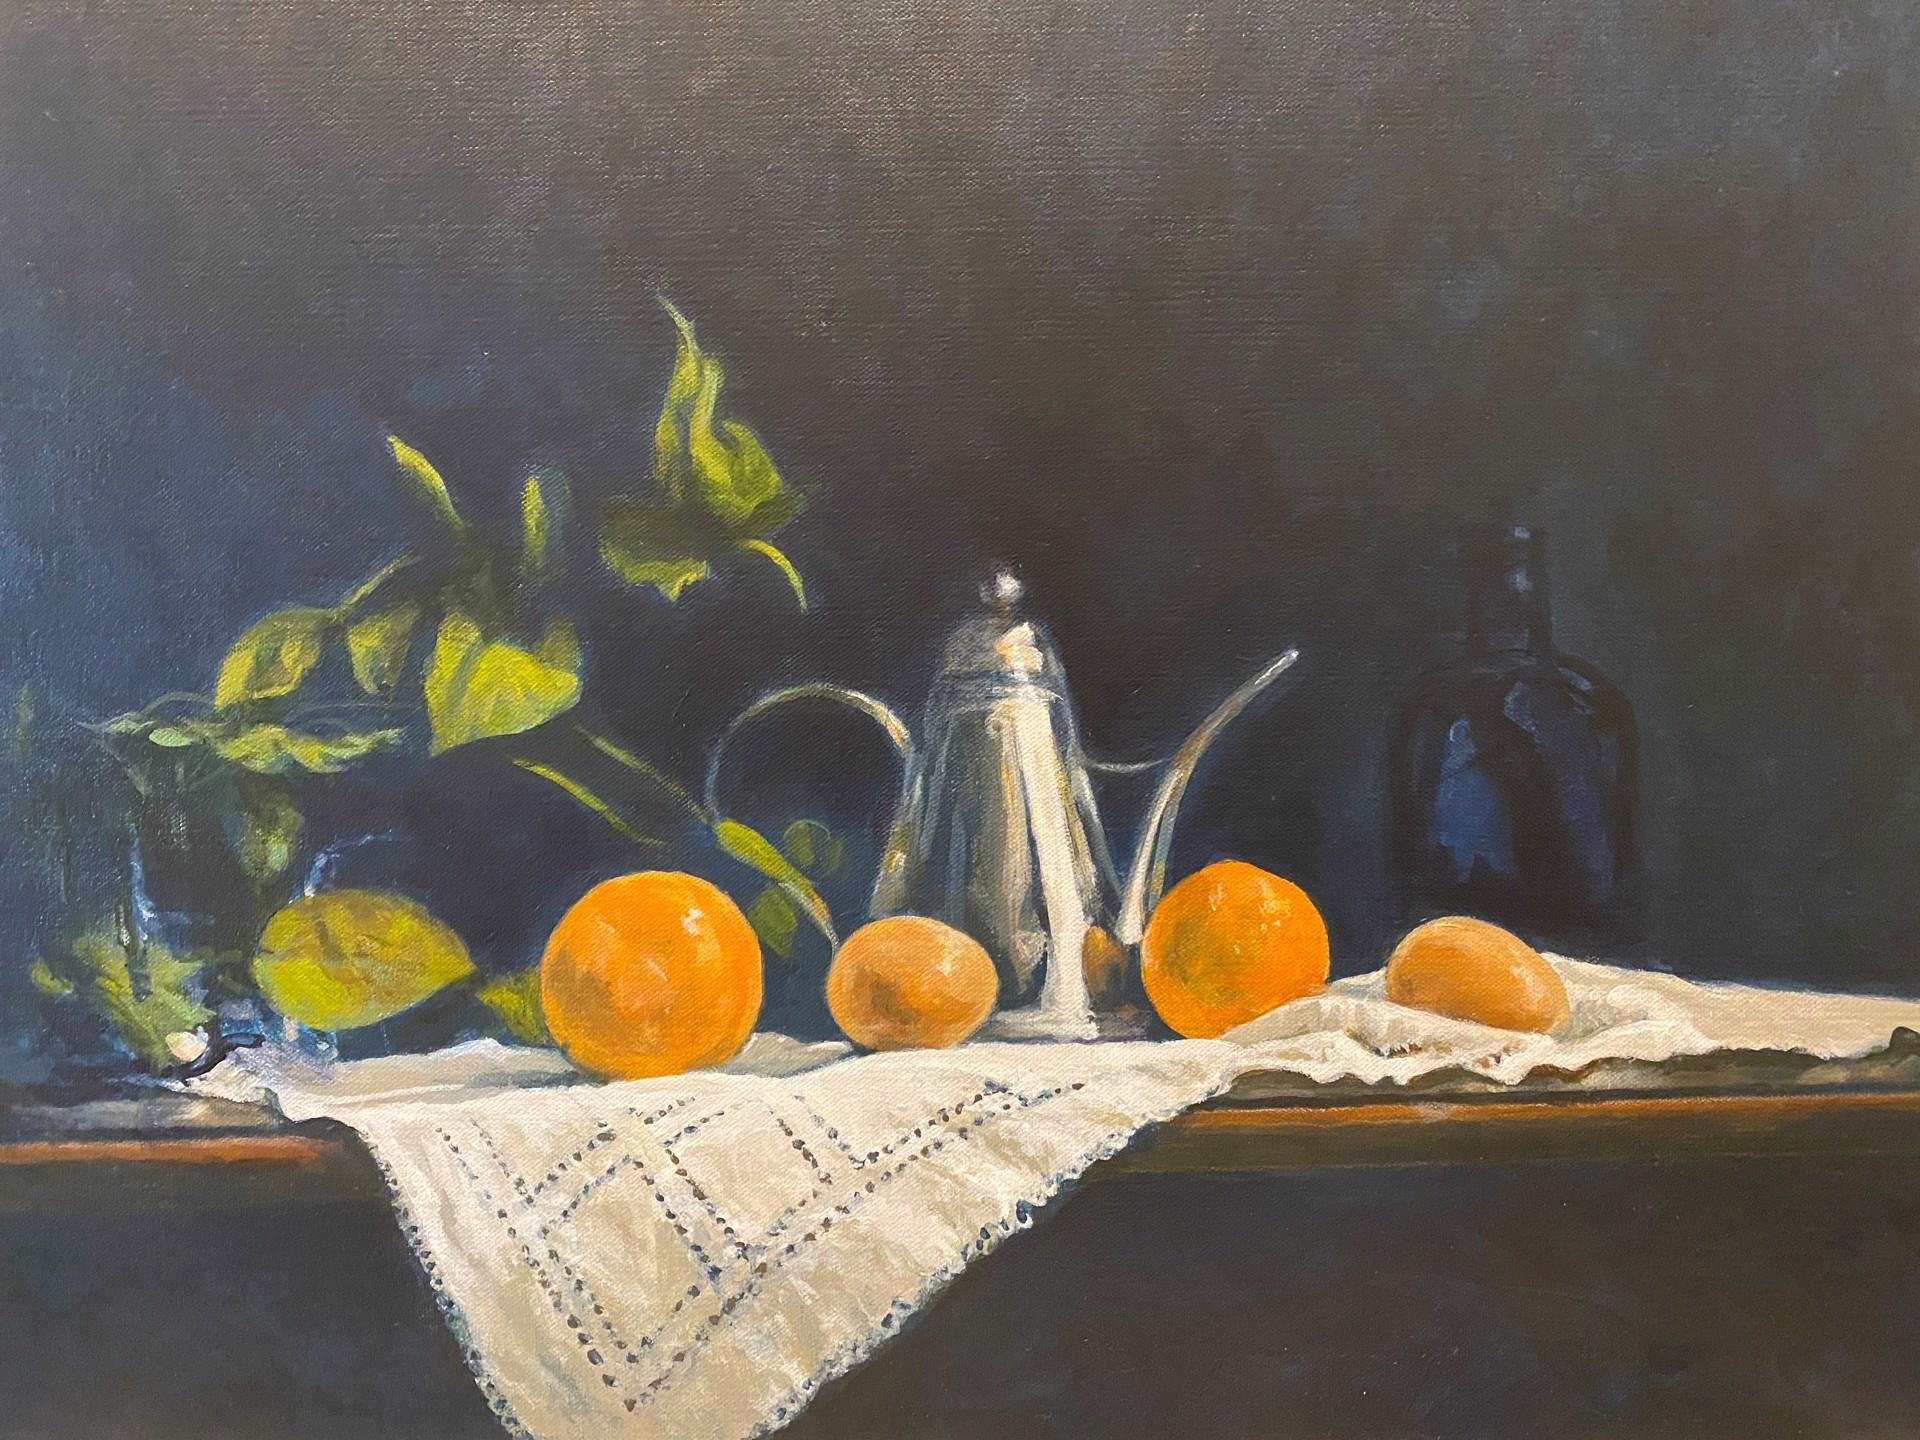 Still Life with Oranges  - Art by Douglas H. Caves Sr.